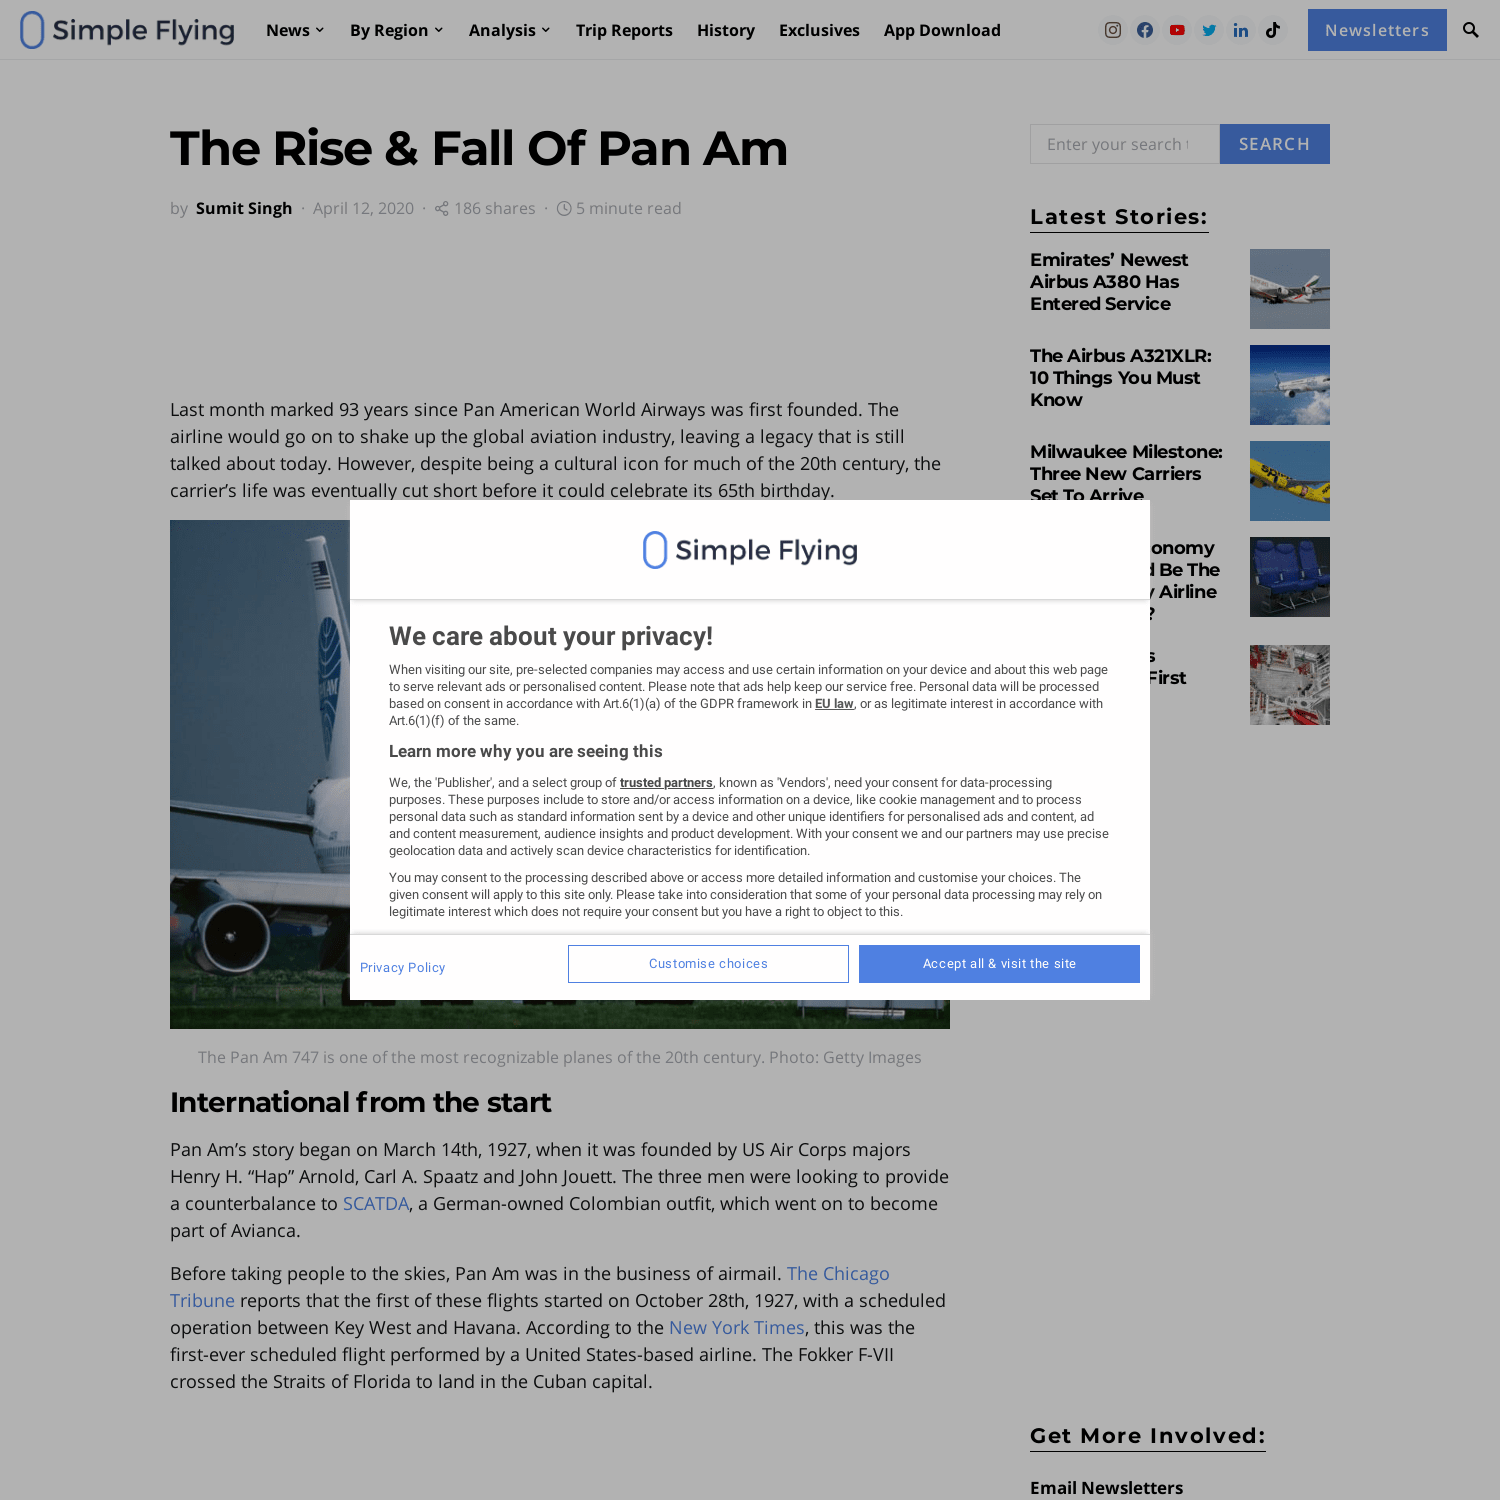 The Rise & Fall Of Pan Am